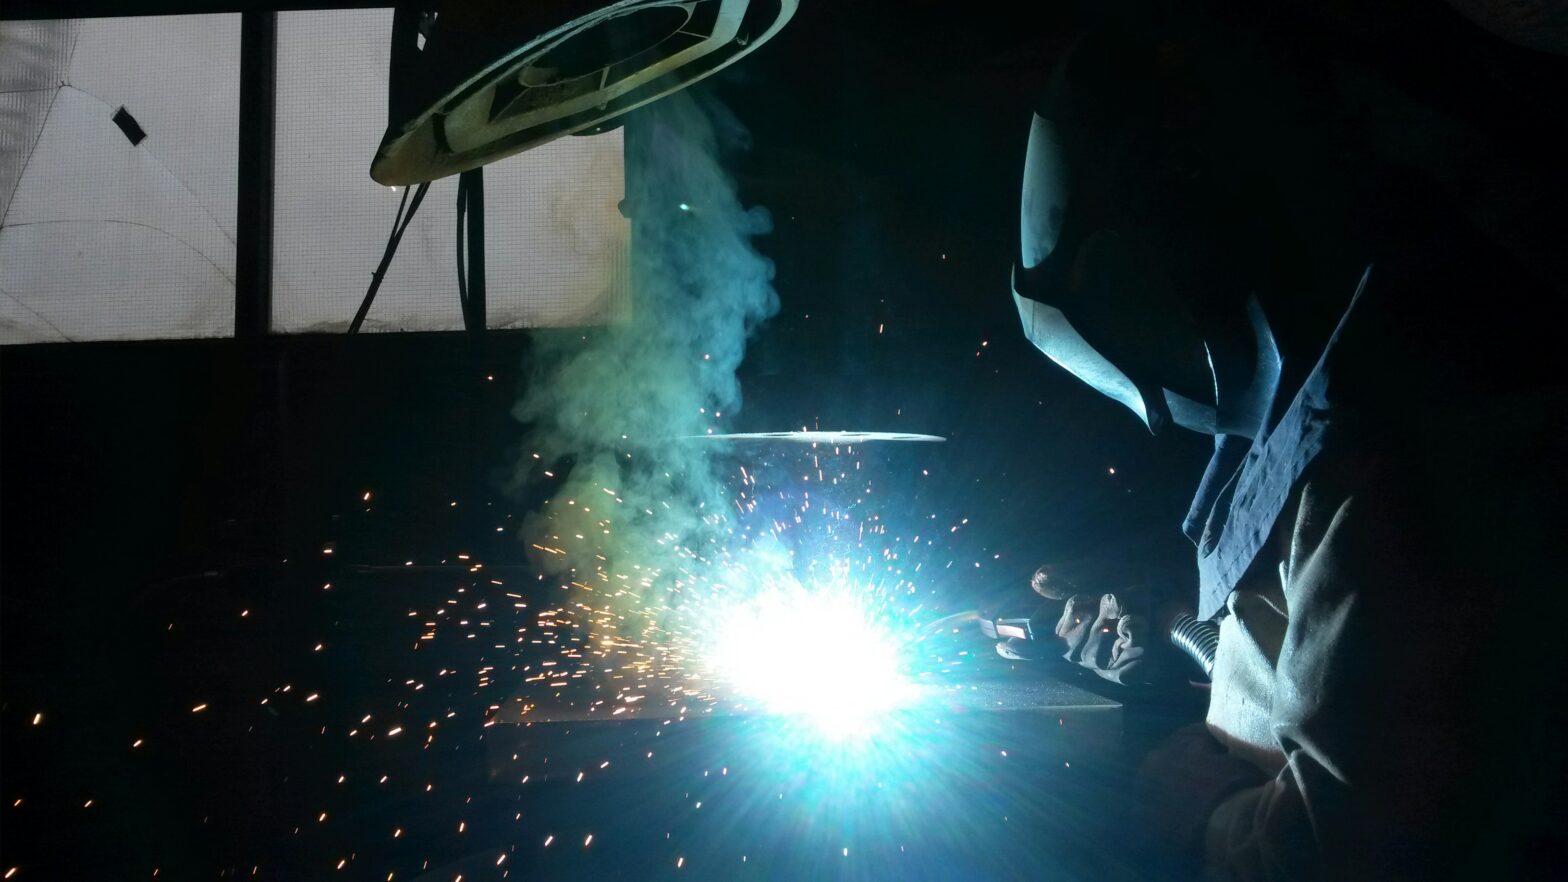 A welder working with intense blue light emitting from the welding spot, creating a shower of bright orange sparks, while smoke rises around the area, all taking place in a dimly lit workshop